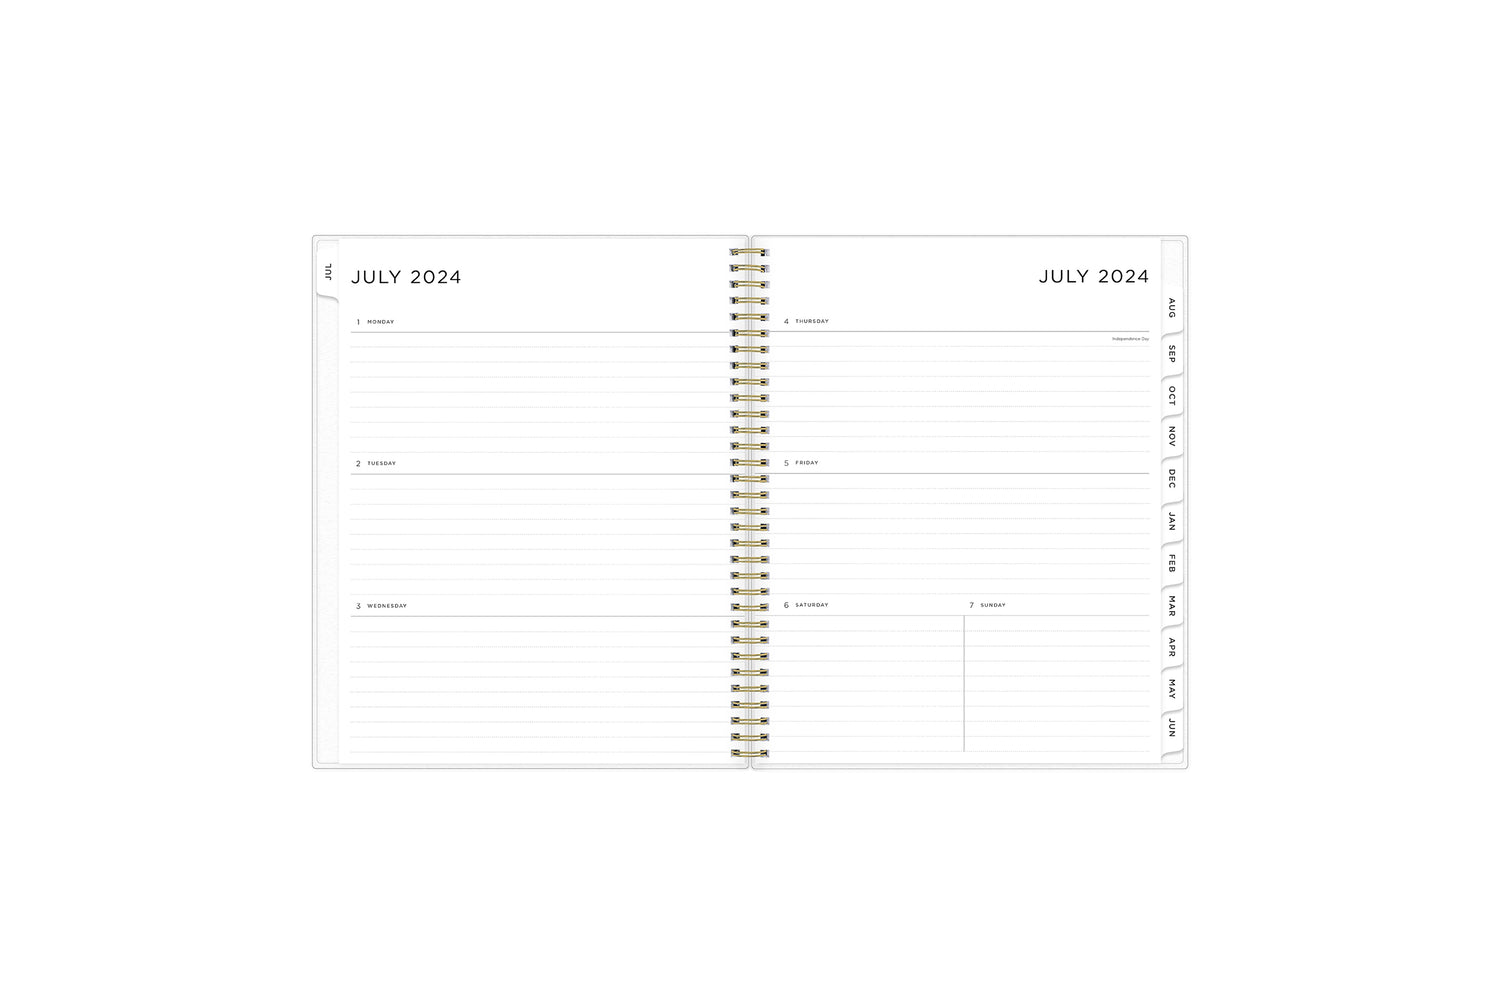 weekly monthly planner features a weekly spread with clean writing space for notes, to-do lists, projects, goals, doodling in a 8.5x11 planner size